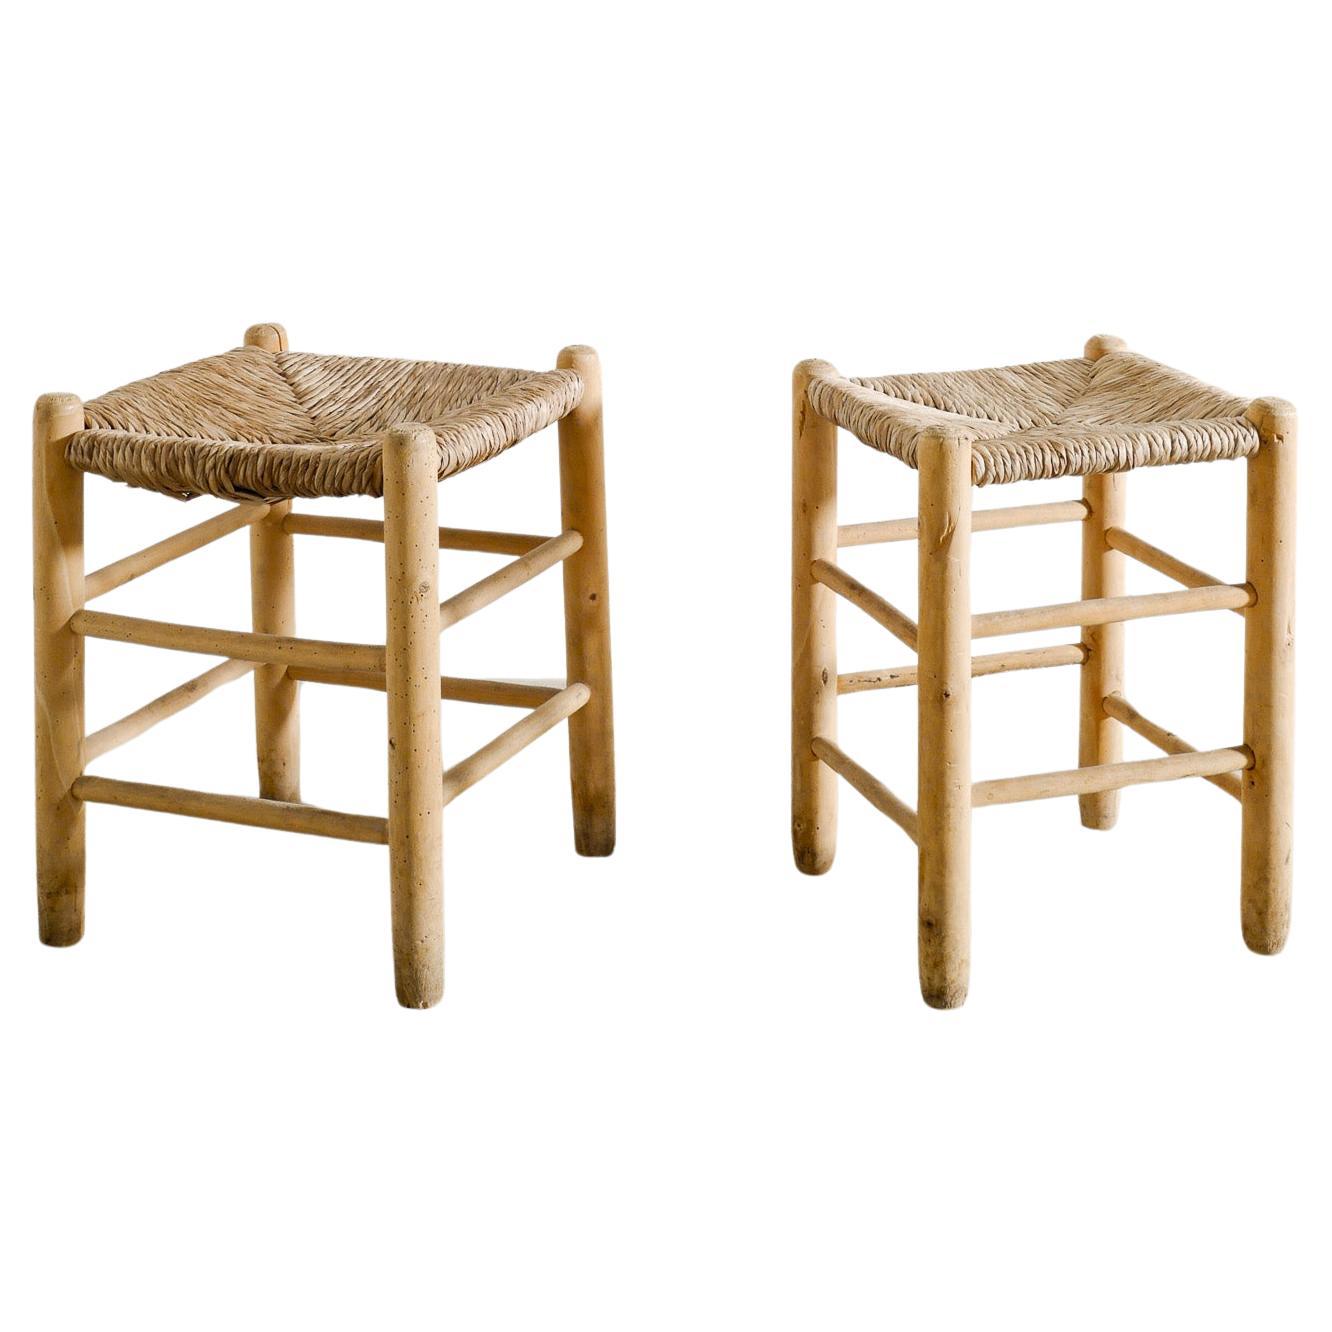 Pair of French Mid Century Wooden Straw Rush Stools in style of Perriand, 1960s For Sale